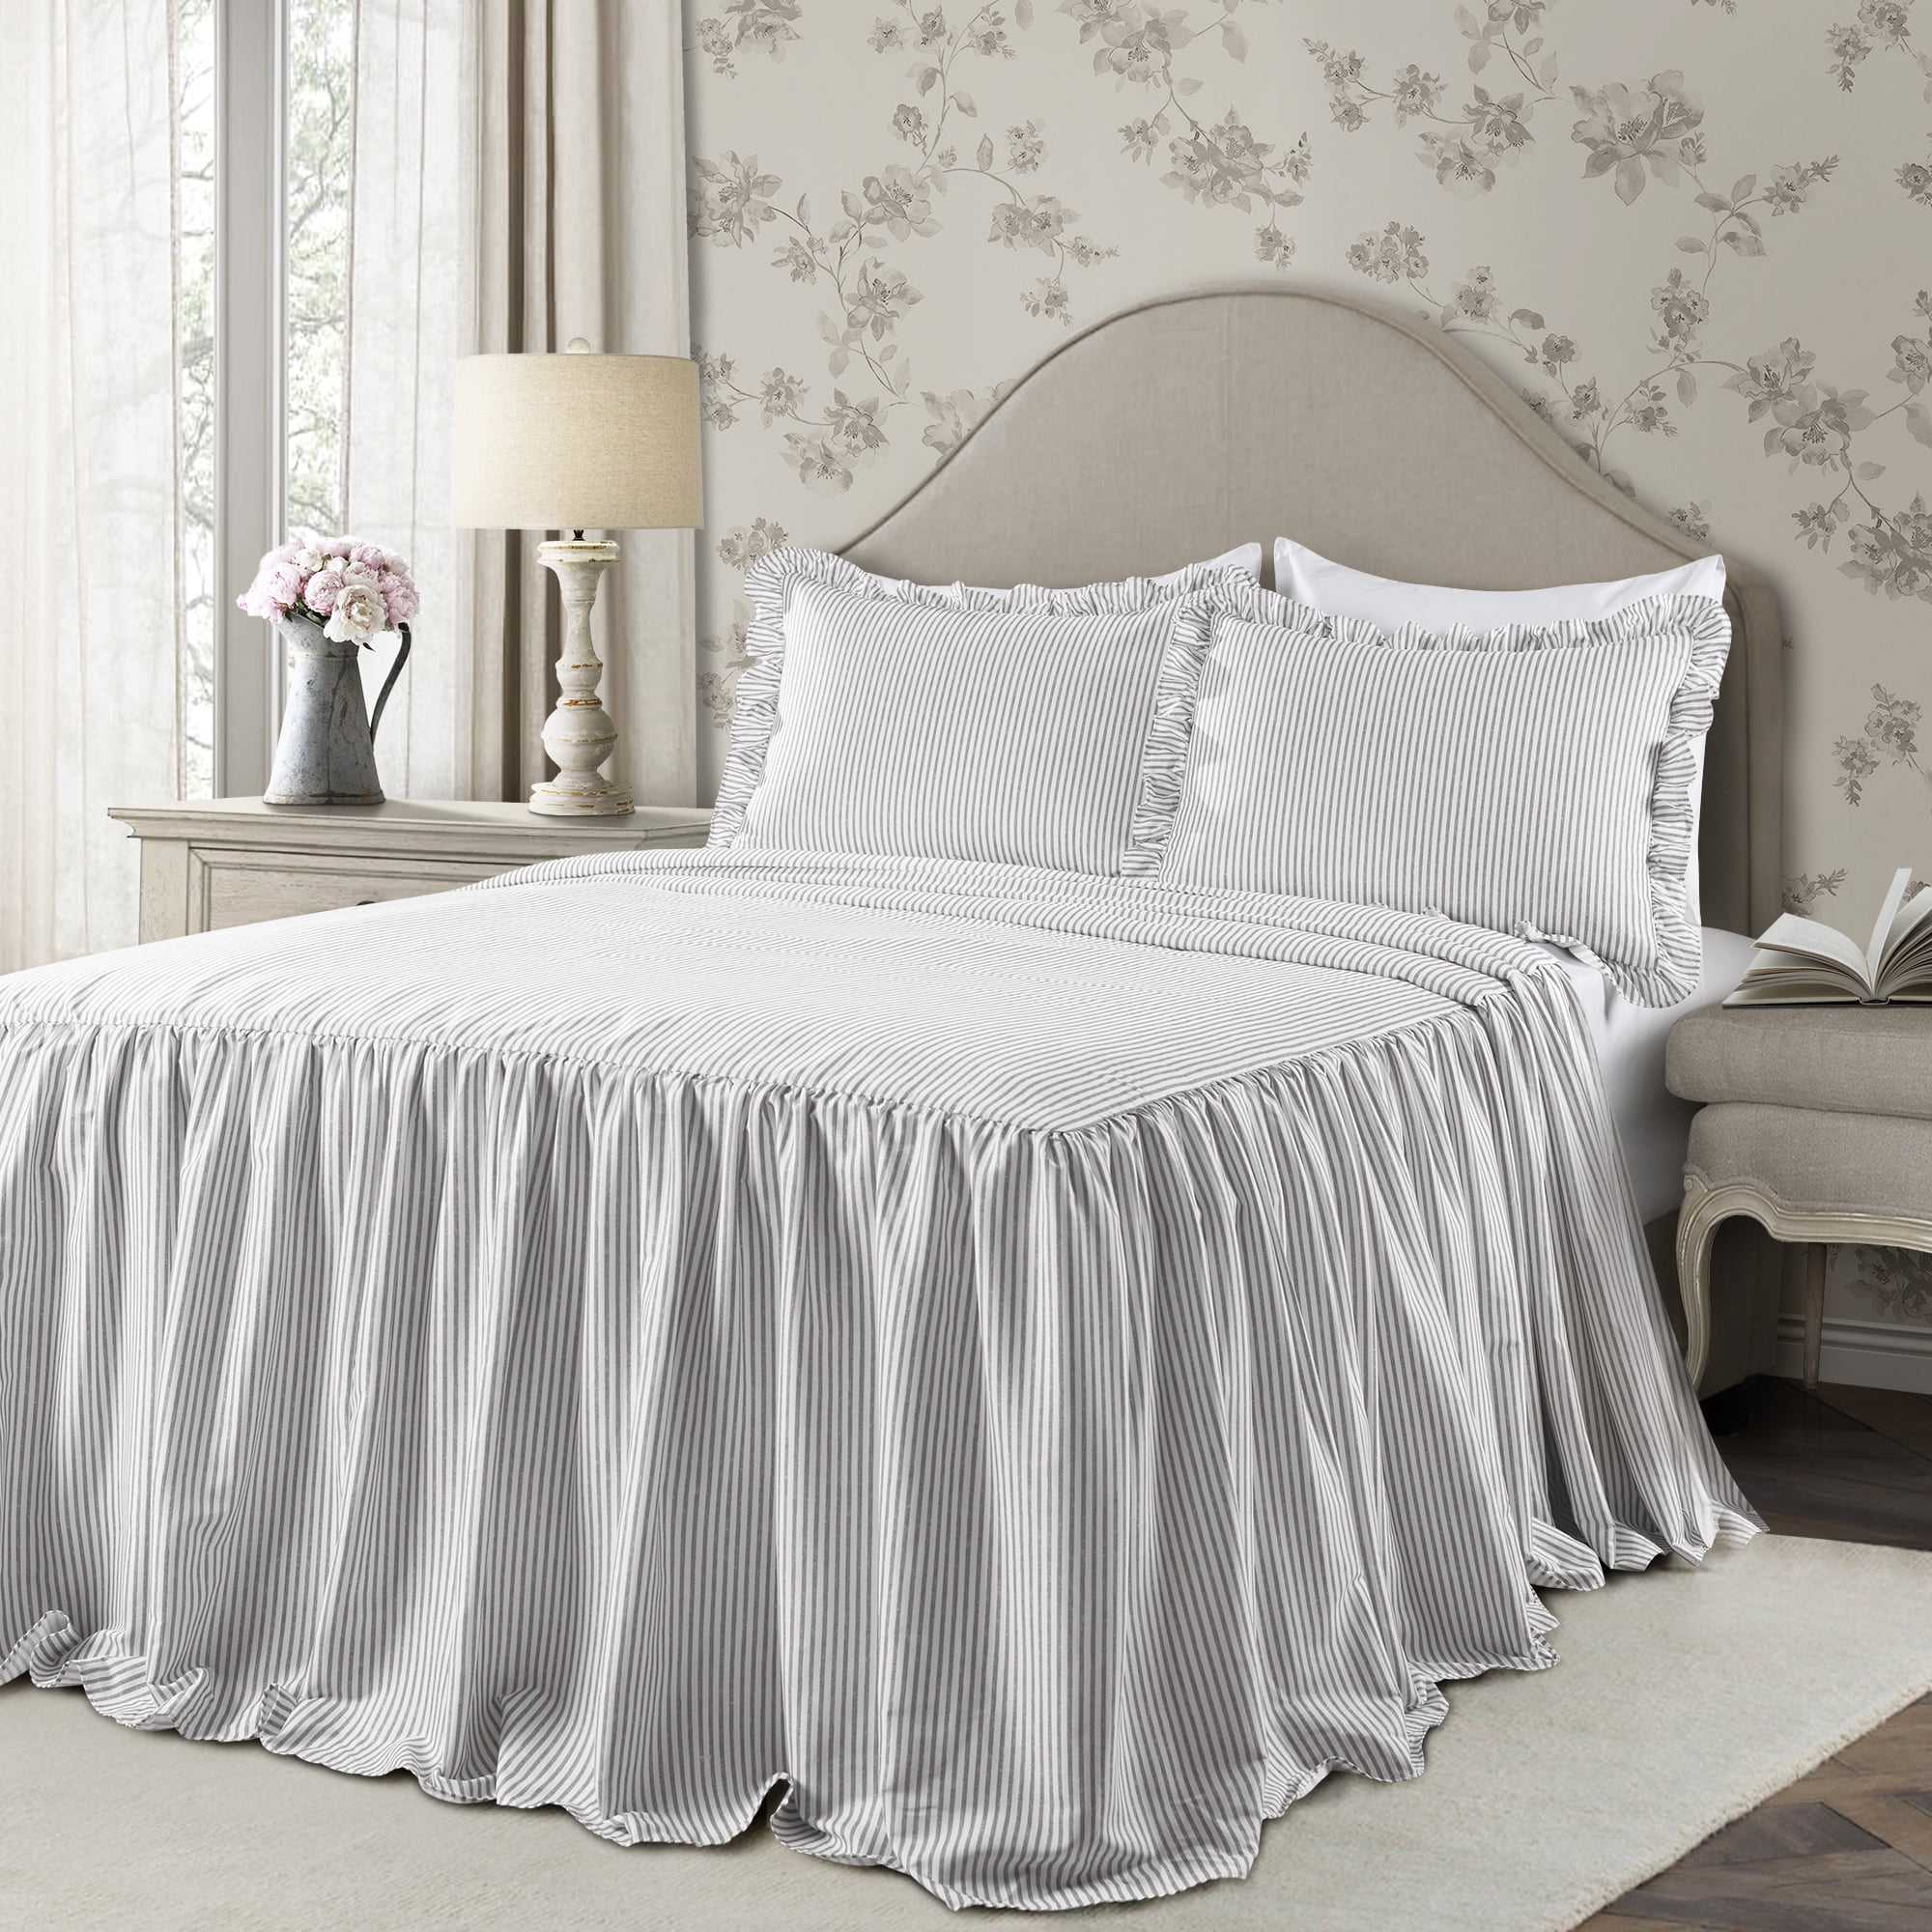 Details about   Gray Grey Yellow Floral Embroidered Stripe 8 pc Comforter Set Queen King Bedding